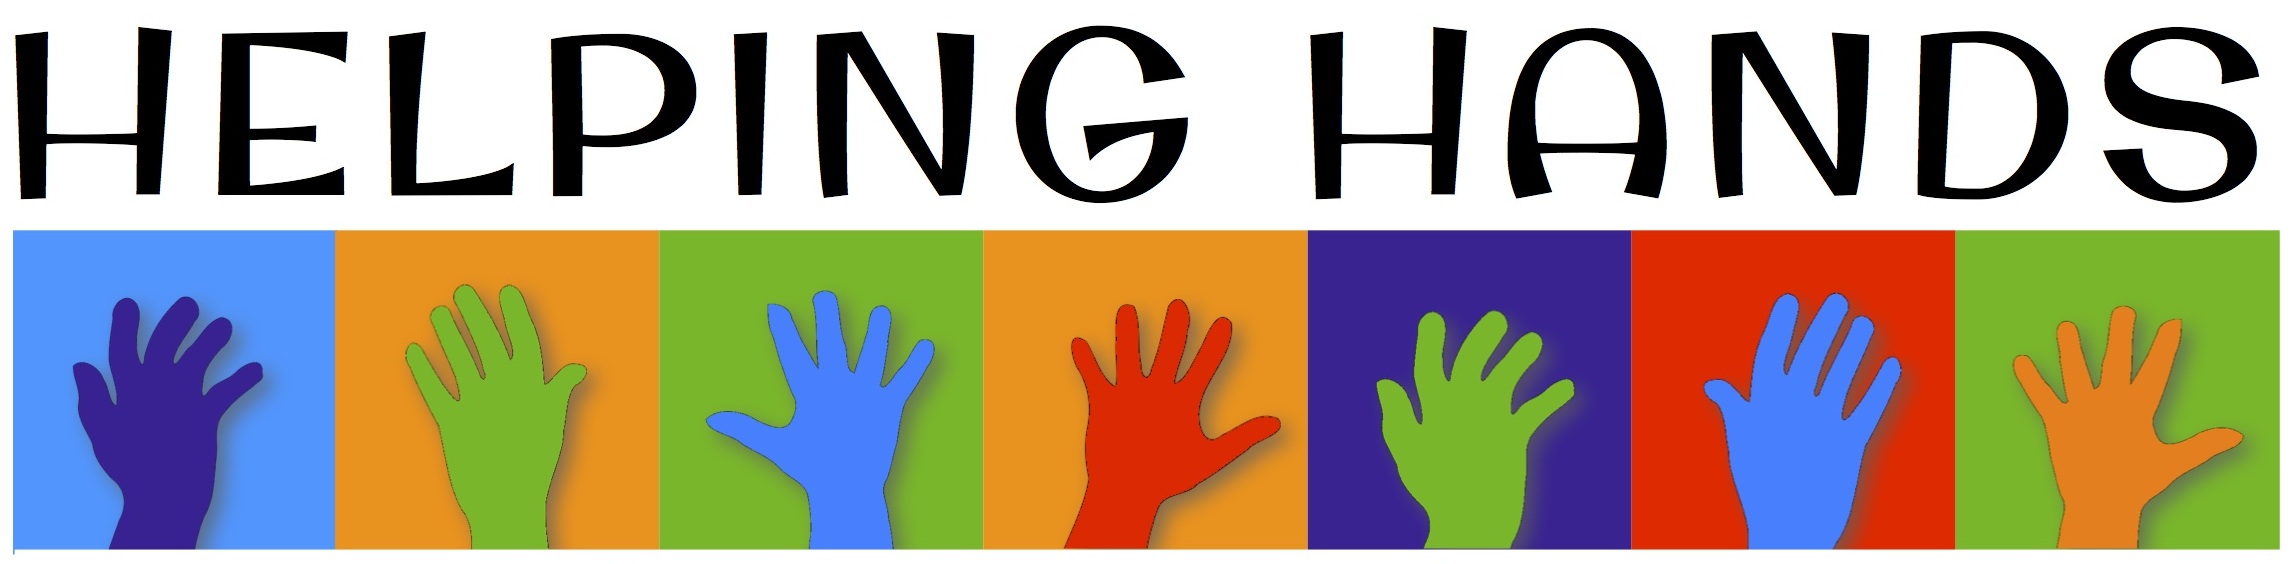 free clipart images helping hands - photo #46